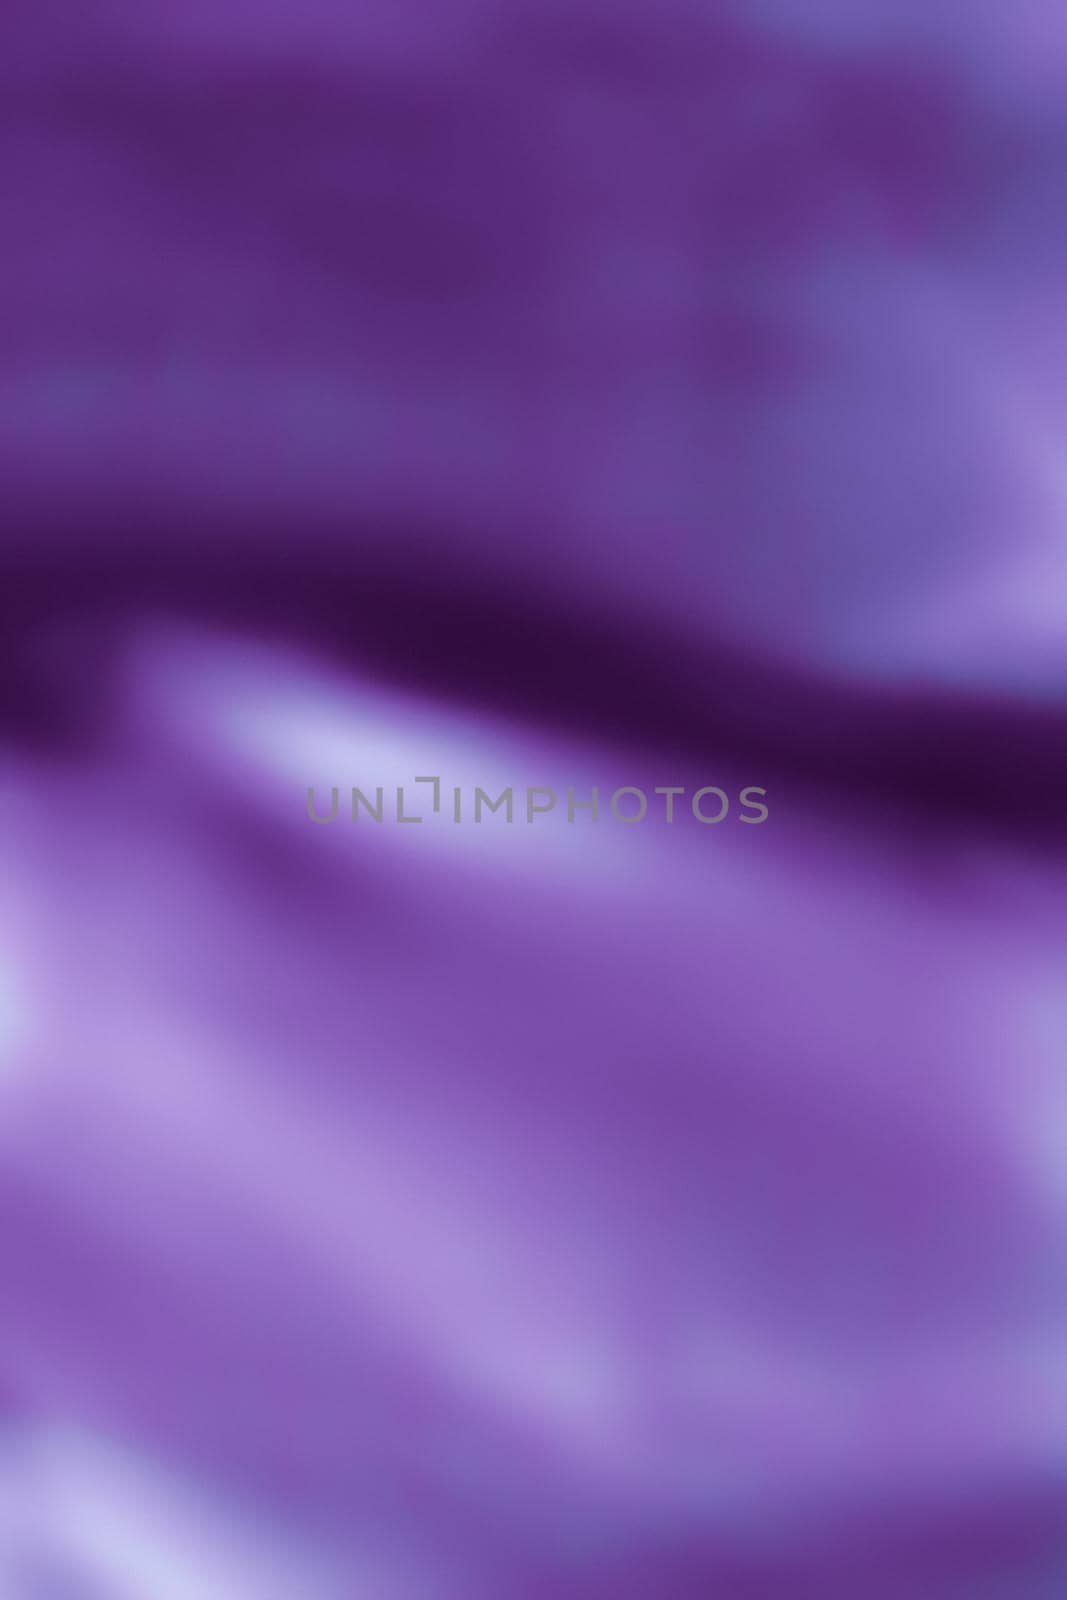 Holiday branding, beauty veil and glamour backdrop concept - Purple abstract art background, silk texture and wave lines in motion for classic luxury design